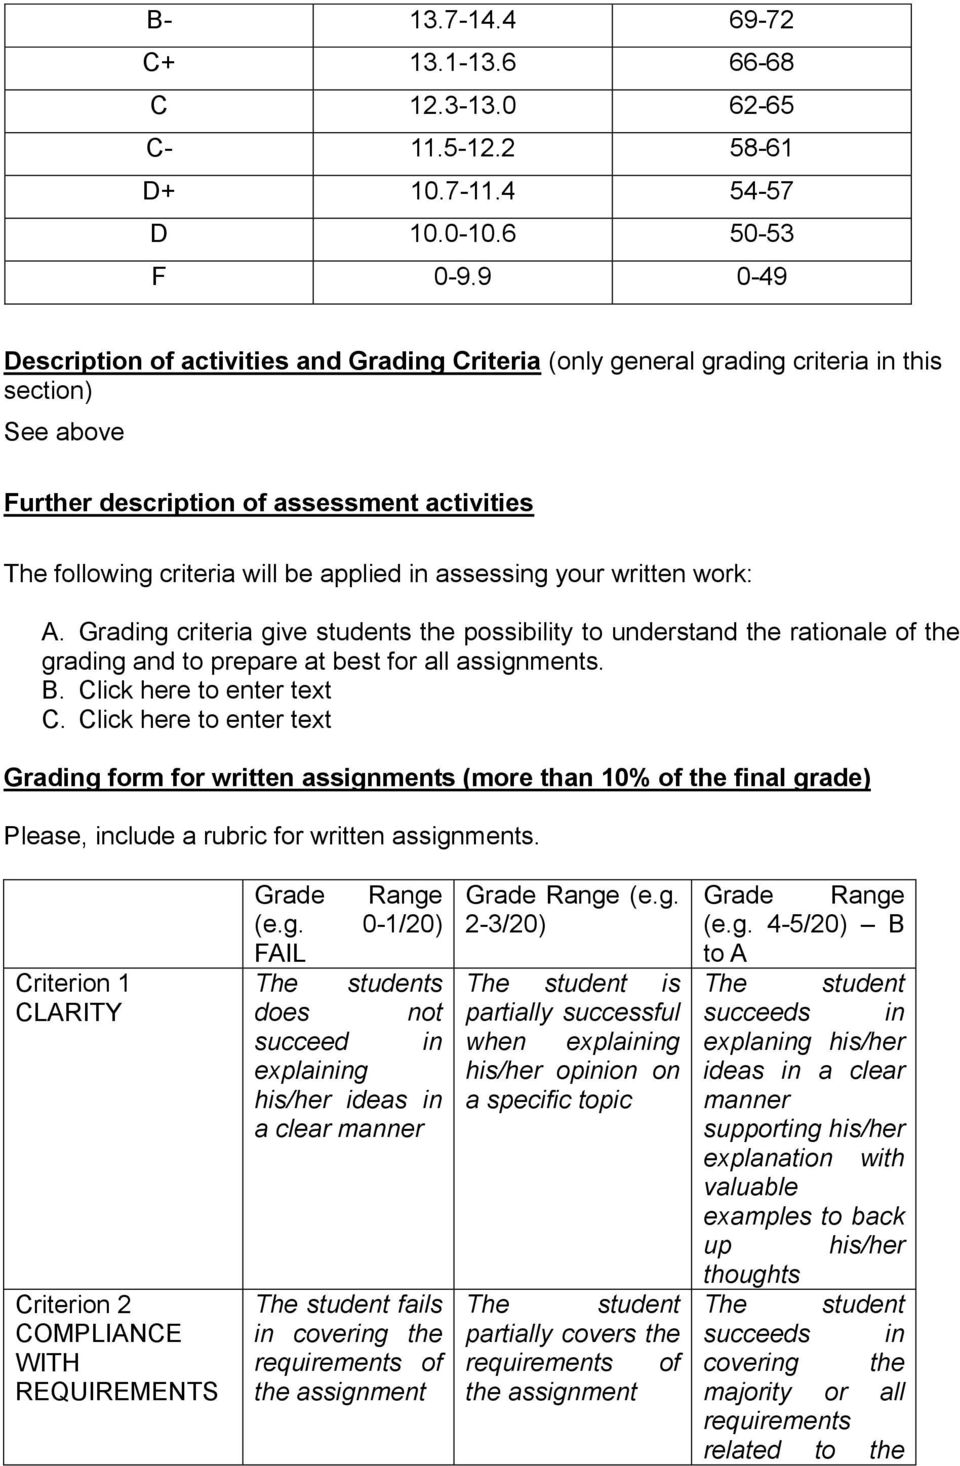 assessing your written work: A. Grading criteria give students the possibility to understand the rationale of the grading and to prepare at best for all assignments. B. Click here to enter text C.